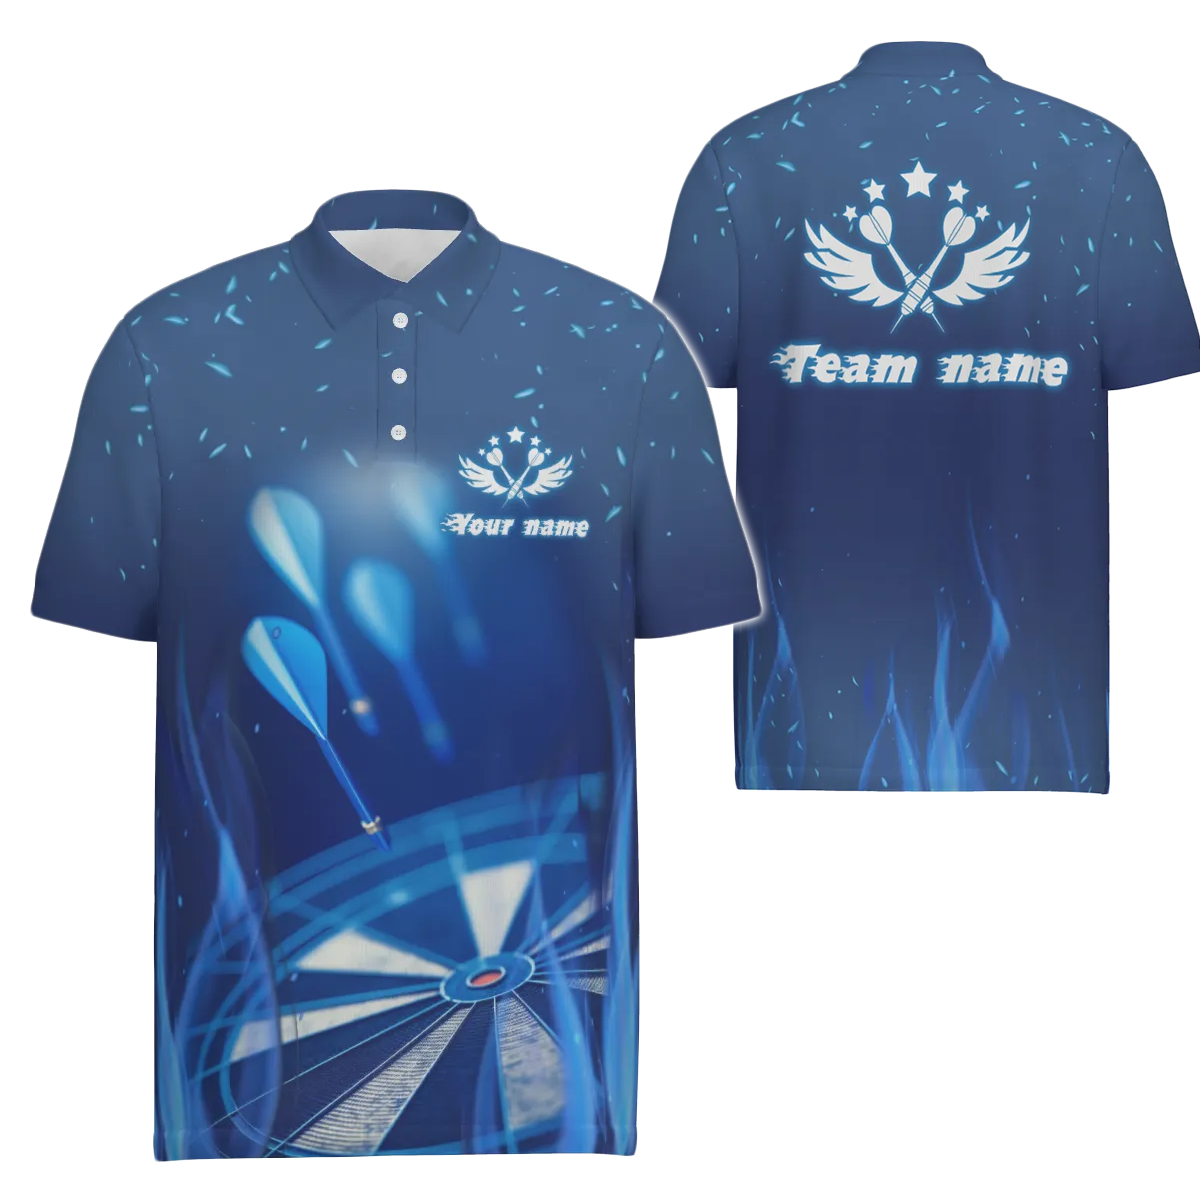 Men's Darts Polo Shirt with Blue Flame and Star Design - Cool Dart Jersey for Men V481